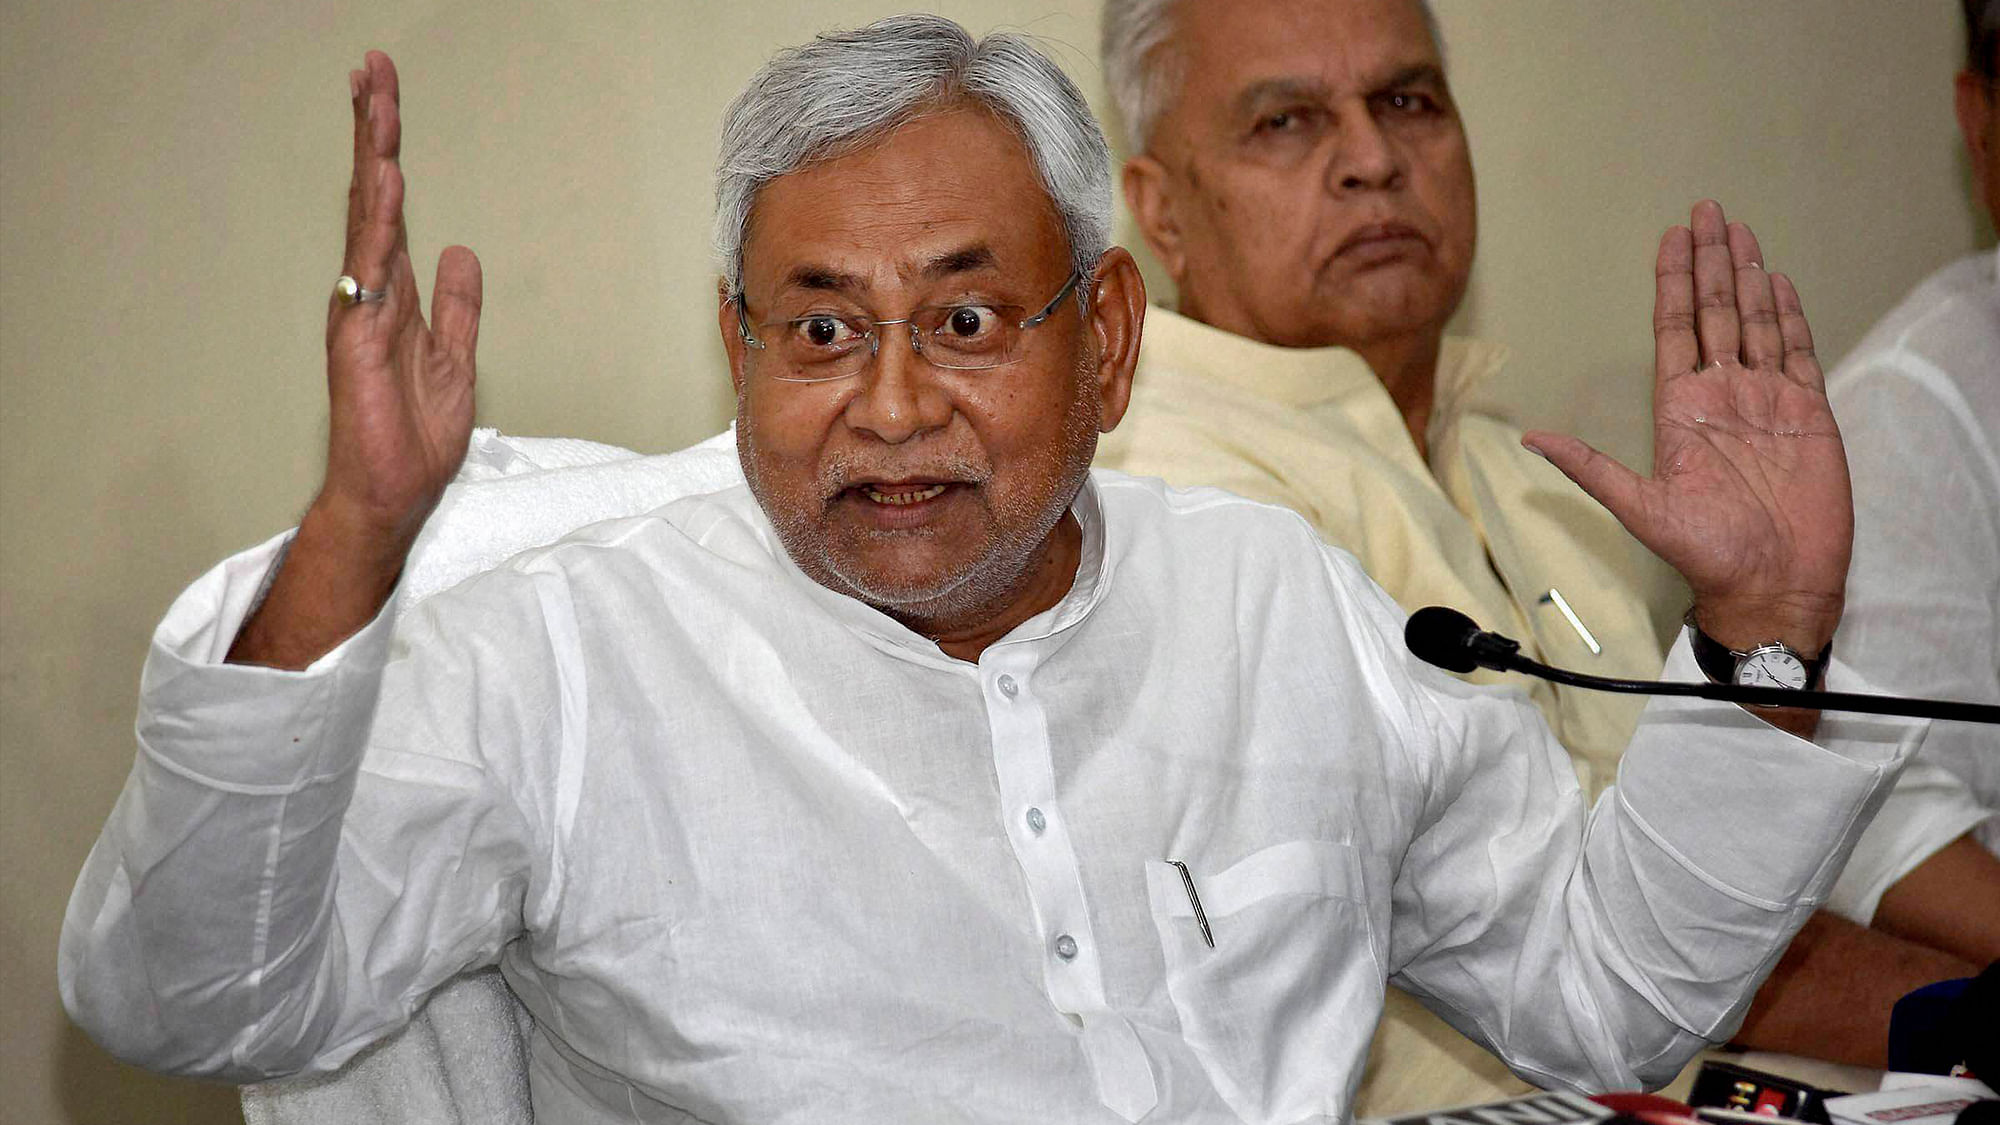  Bihar Chief Minister Nitish Kumar addressing a press conference in Patna on Monday. Image used for representational purposes.